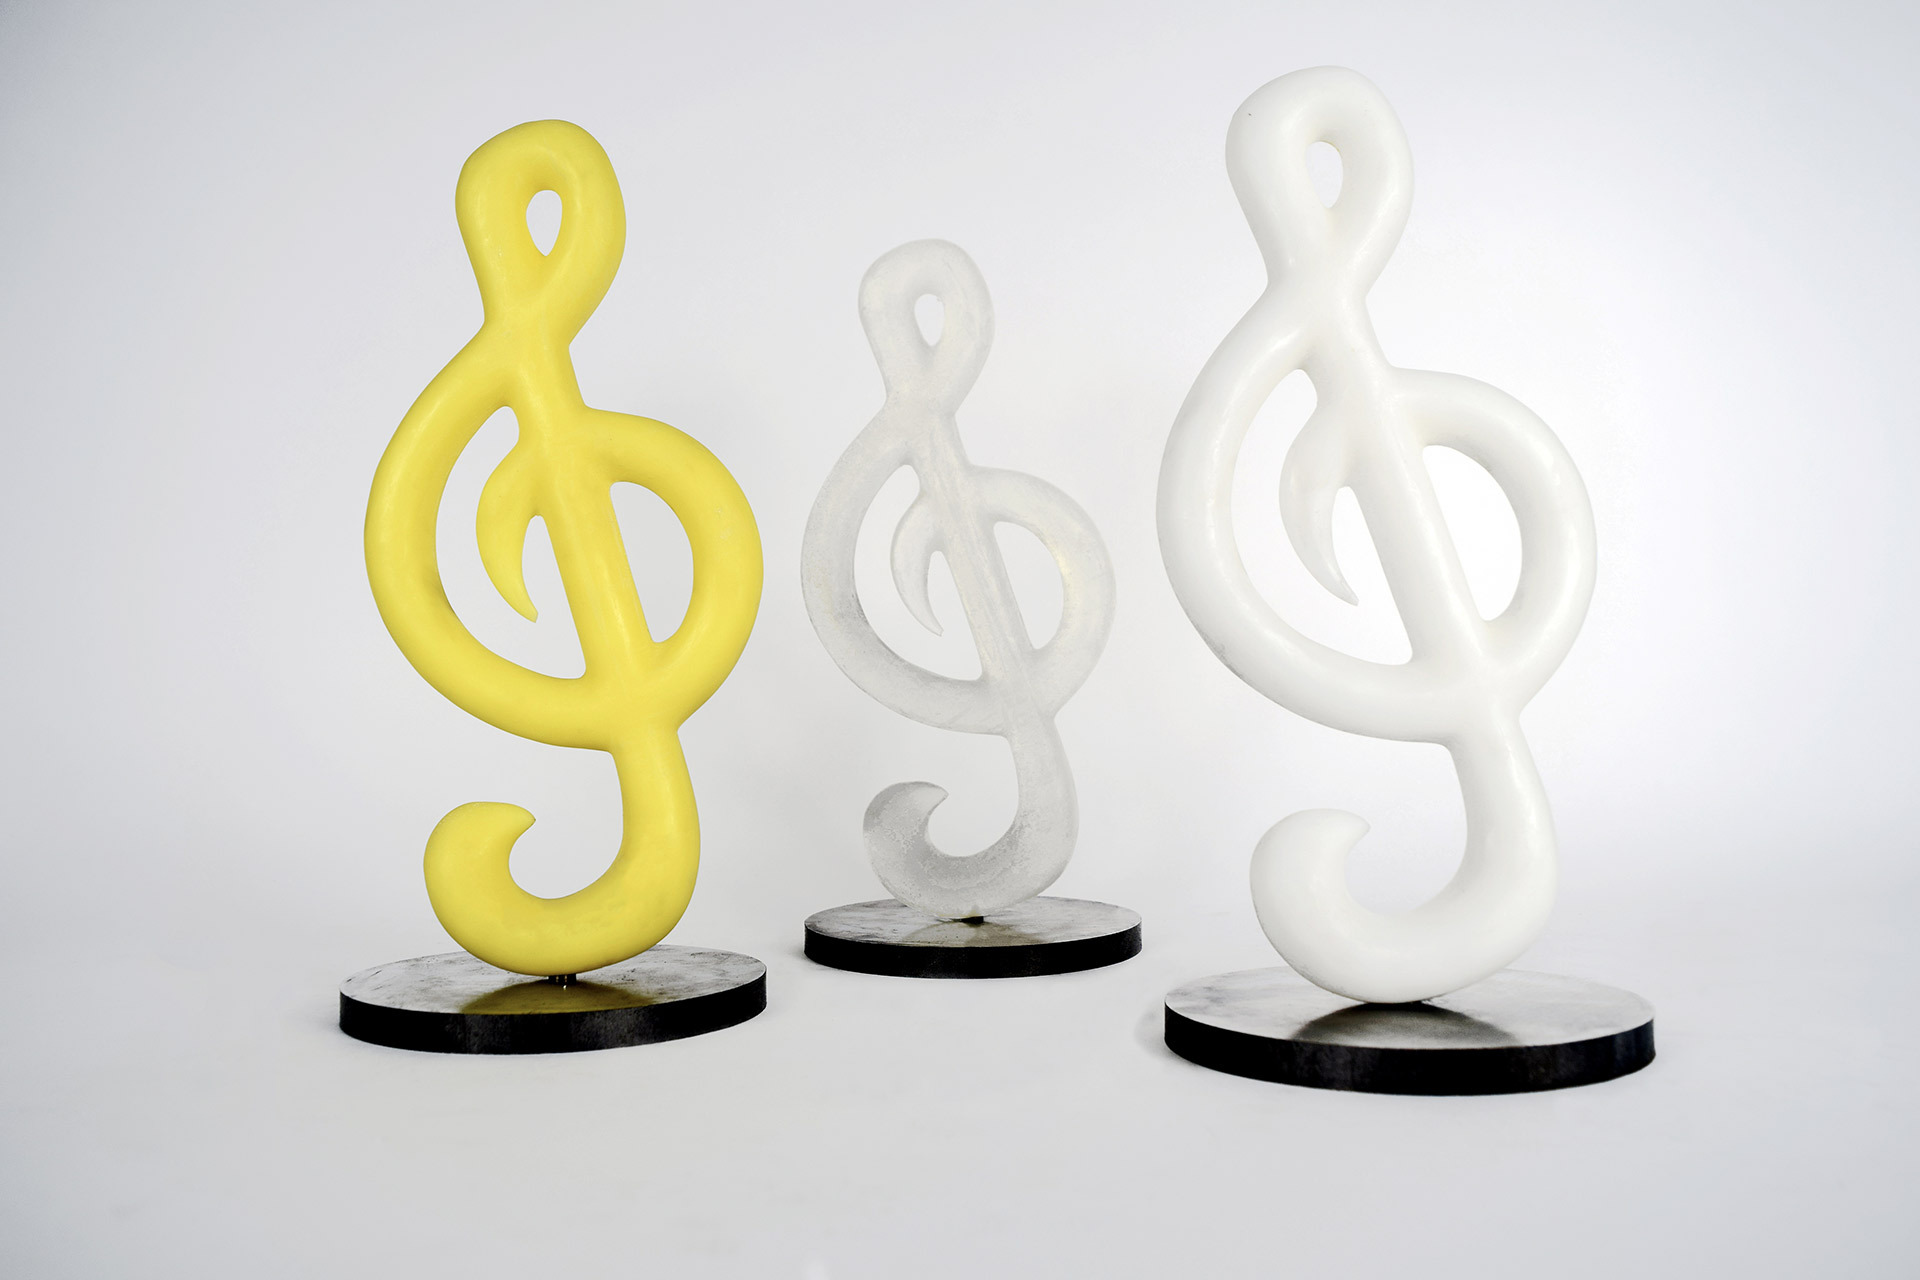 Samples of the Sol Stand in Yellow, Clear and White on a white background.